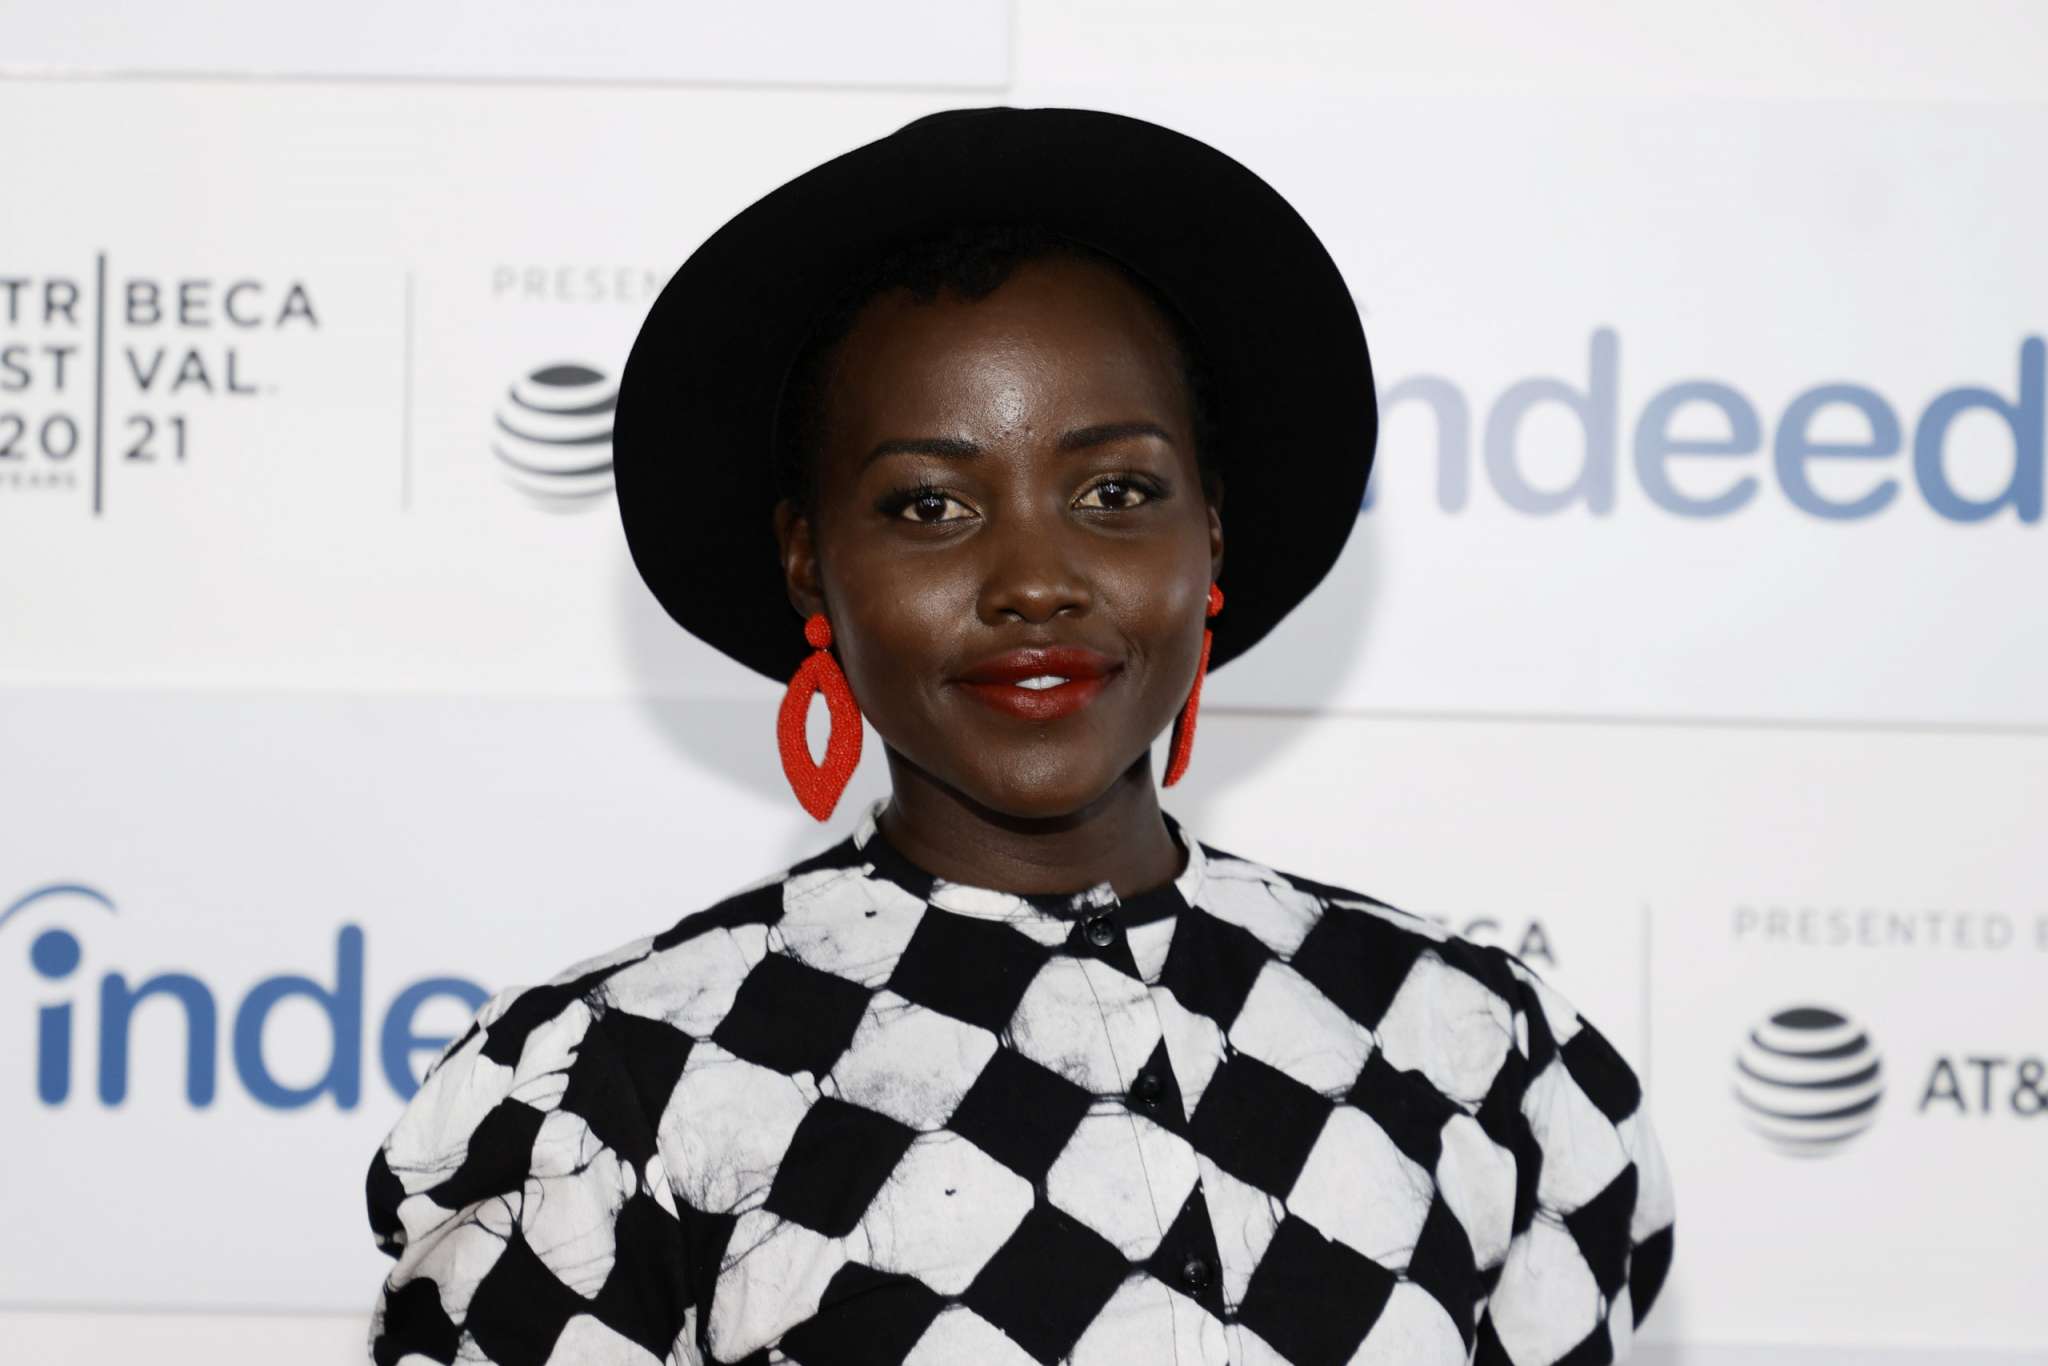 lupita-nyongo-dances-in-cute-video-on-instagram-shows-off-incredible-beach-body